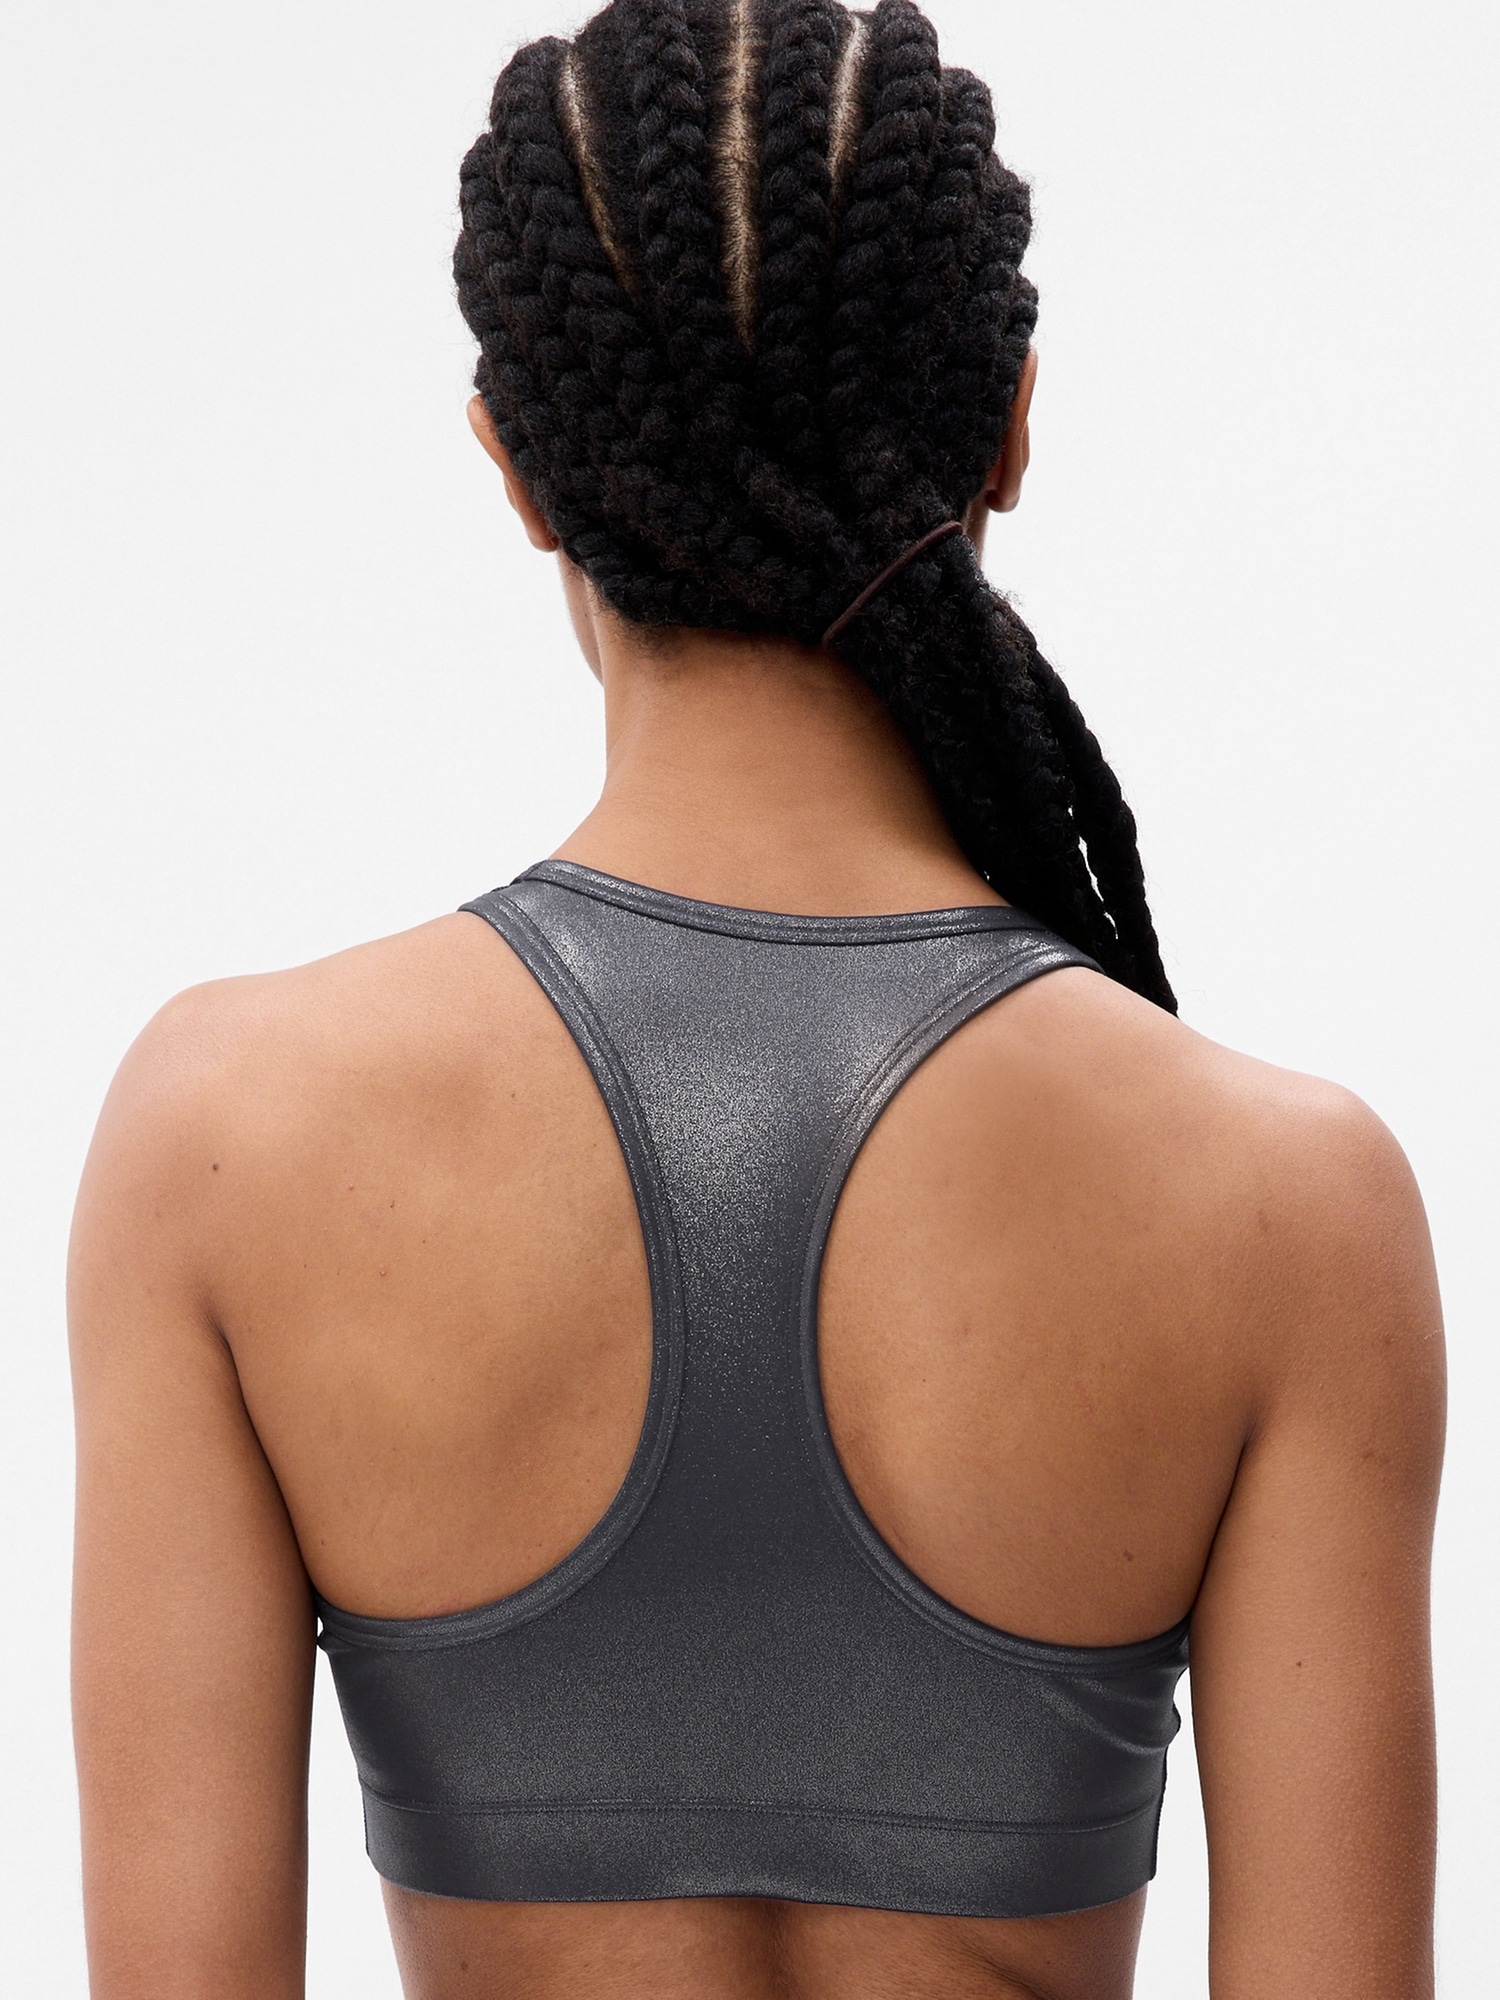 Gap Fit Low Support Ribbed Racerback Sports Bra in Brushed Tech Jersey